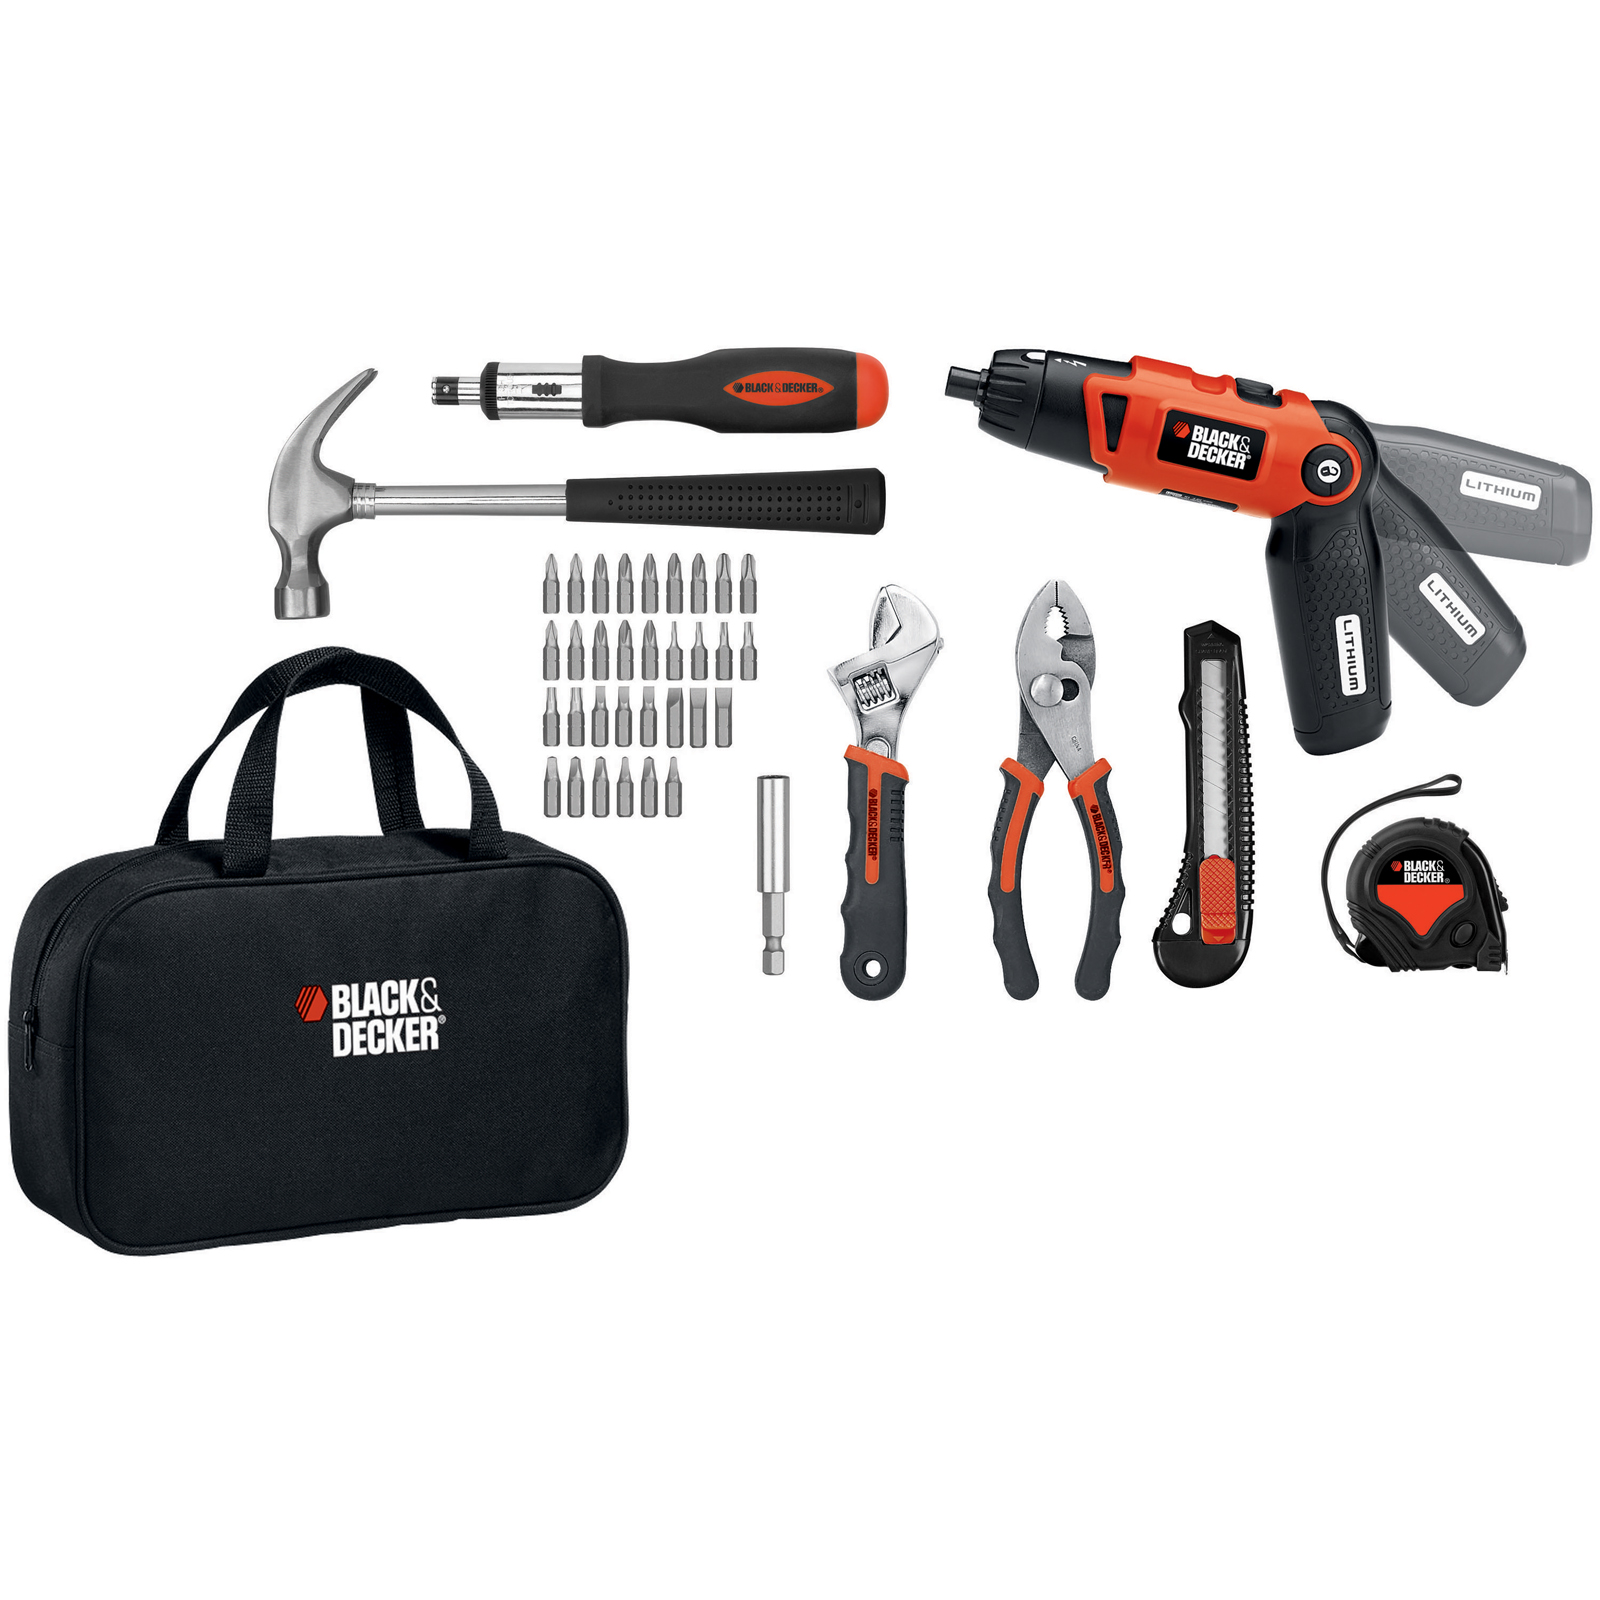 BLACK+DECKER Lithium Screwdriver, Project Kit & Carrying Bag